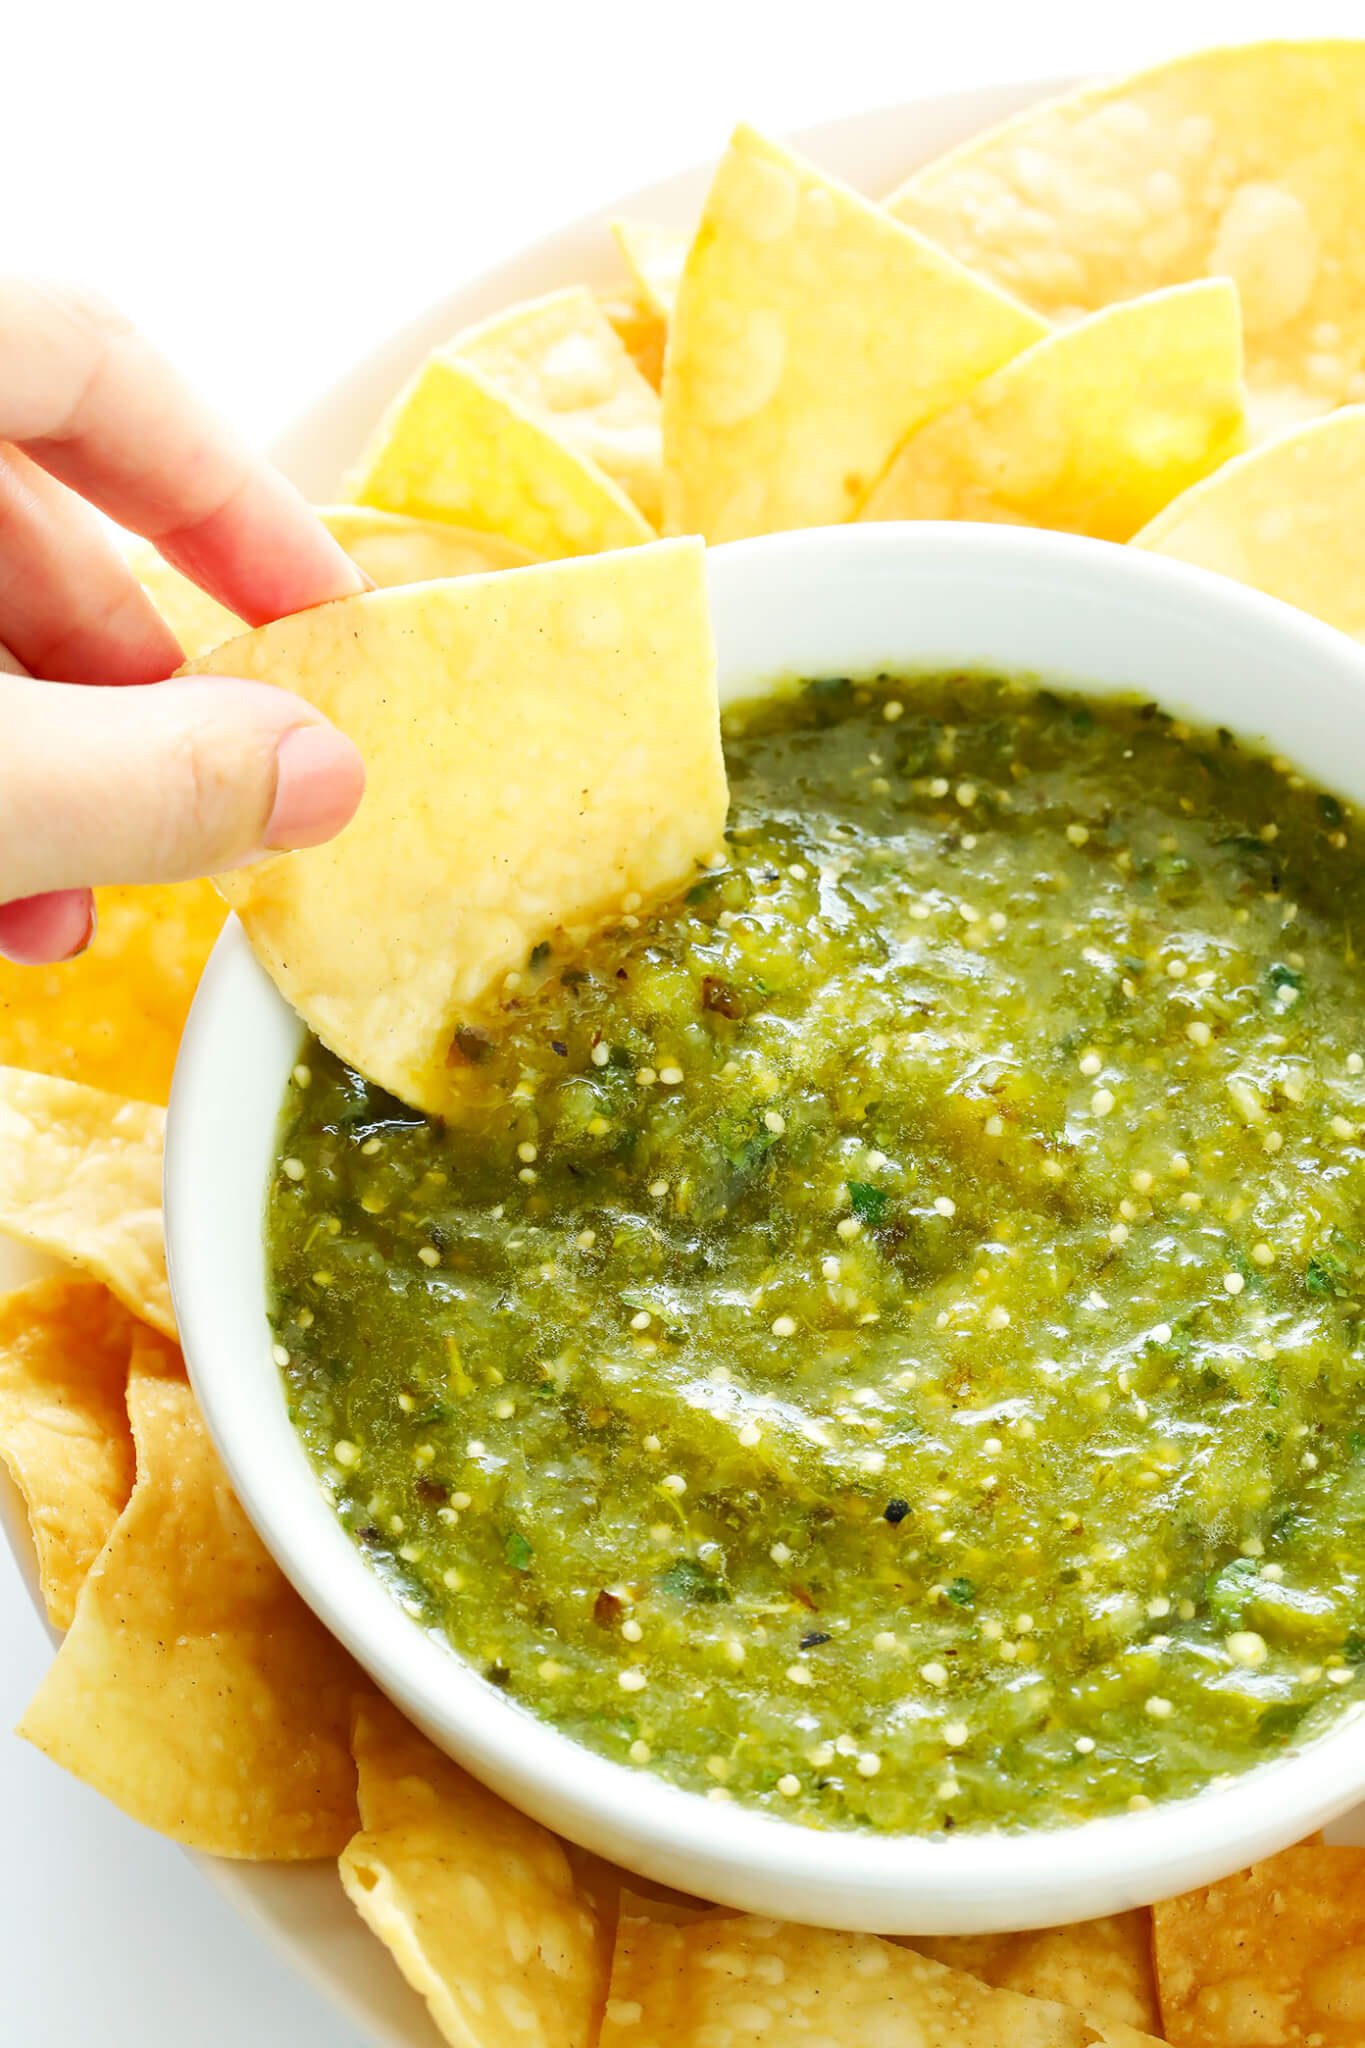 The BEST Salsa Verde recipe!! It's easy to make with roasted tomatillo, cilantro, onion, garlic, lime juice, and cumin...it only takes about 20 minutes to make...and it's the perfect appetizer with chips or accompaniment to your favorite Mexican food! | gimmesomeoven.com (Gluten-Free / Vegan / Vegetarian)